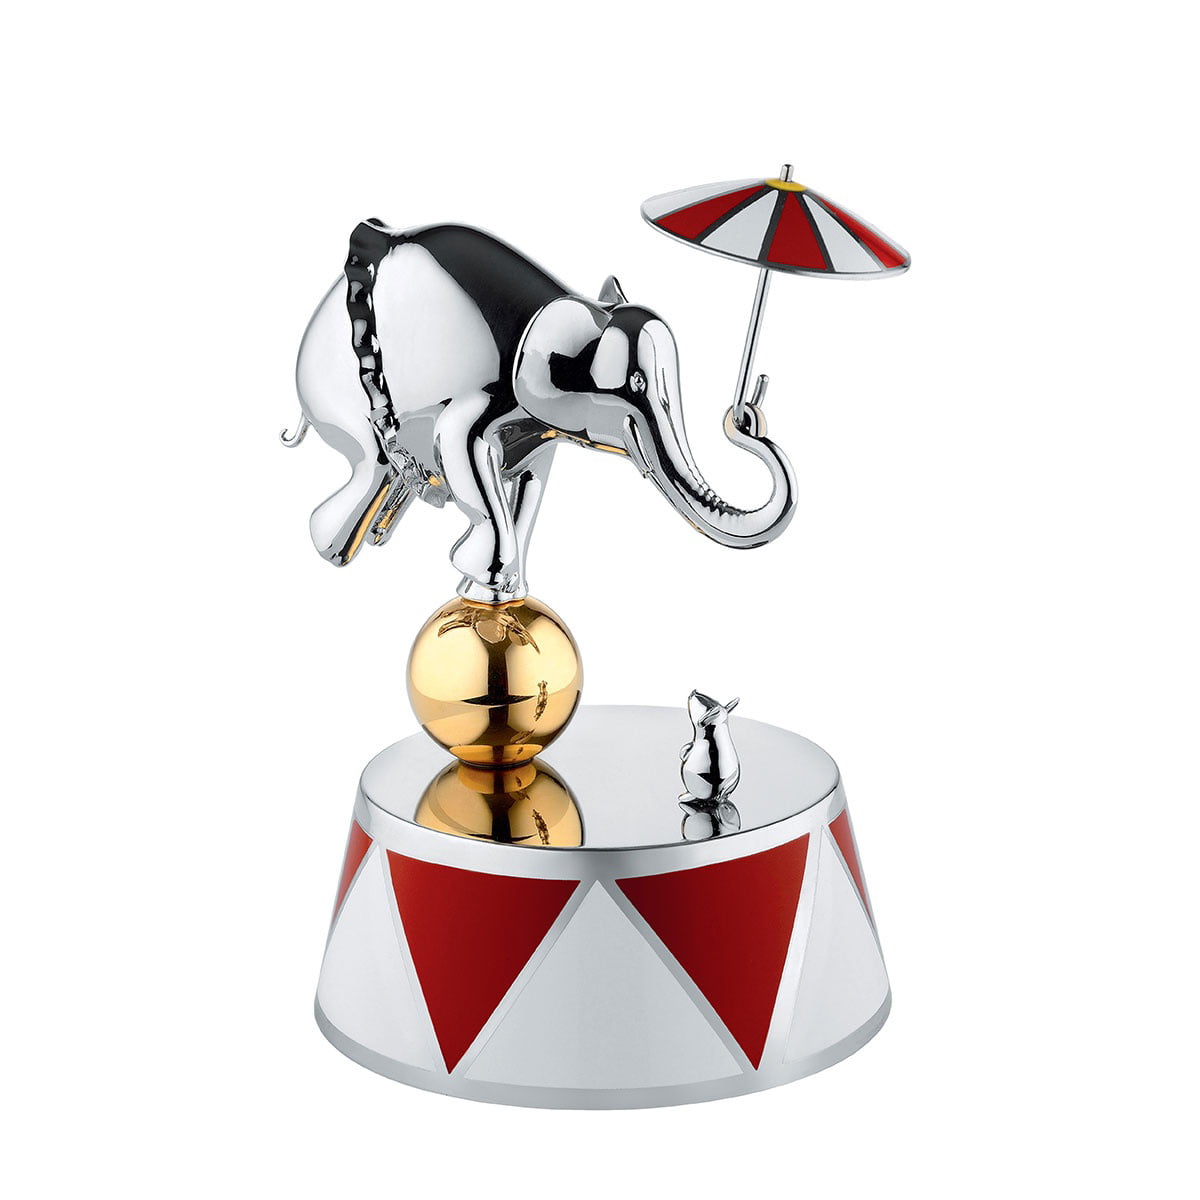 Limited Edition Ballerina Music Box by Alessi